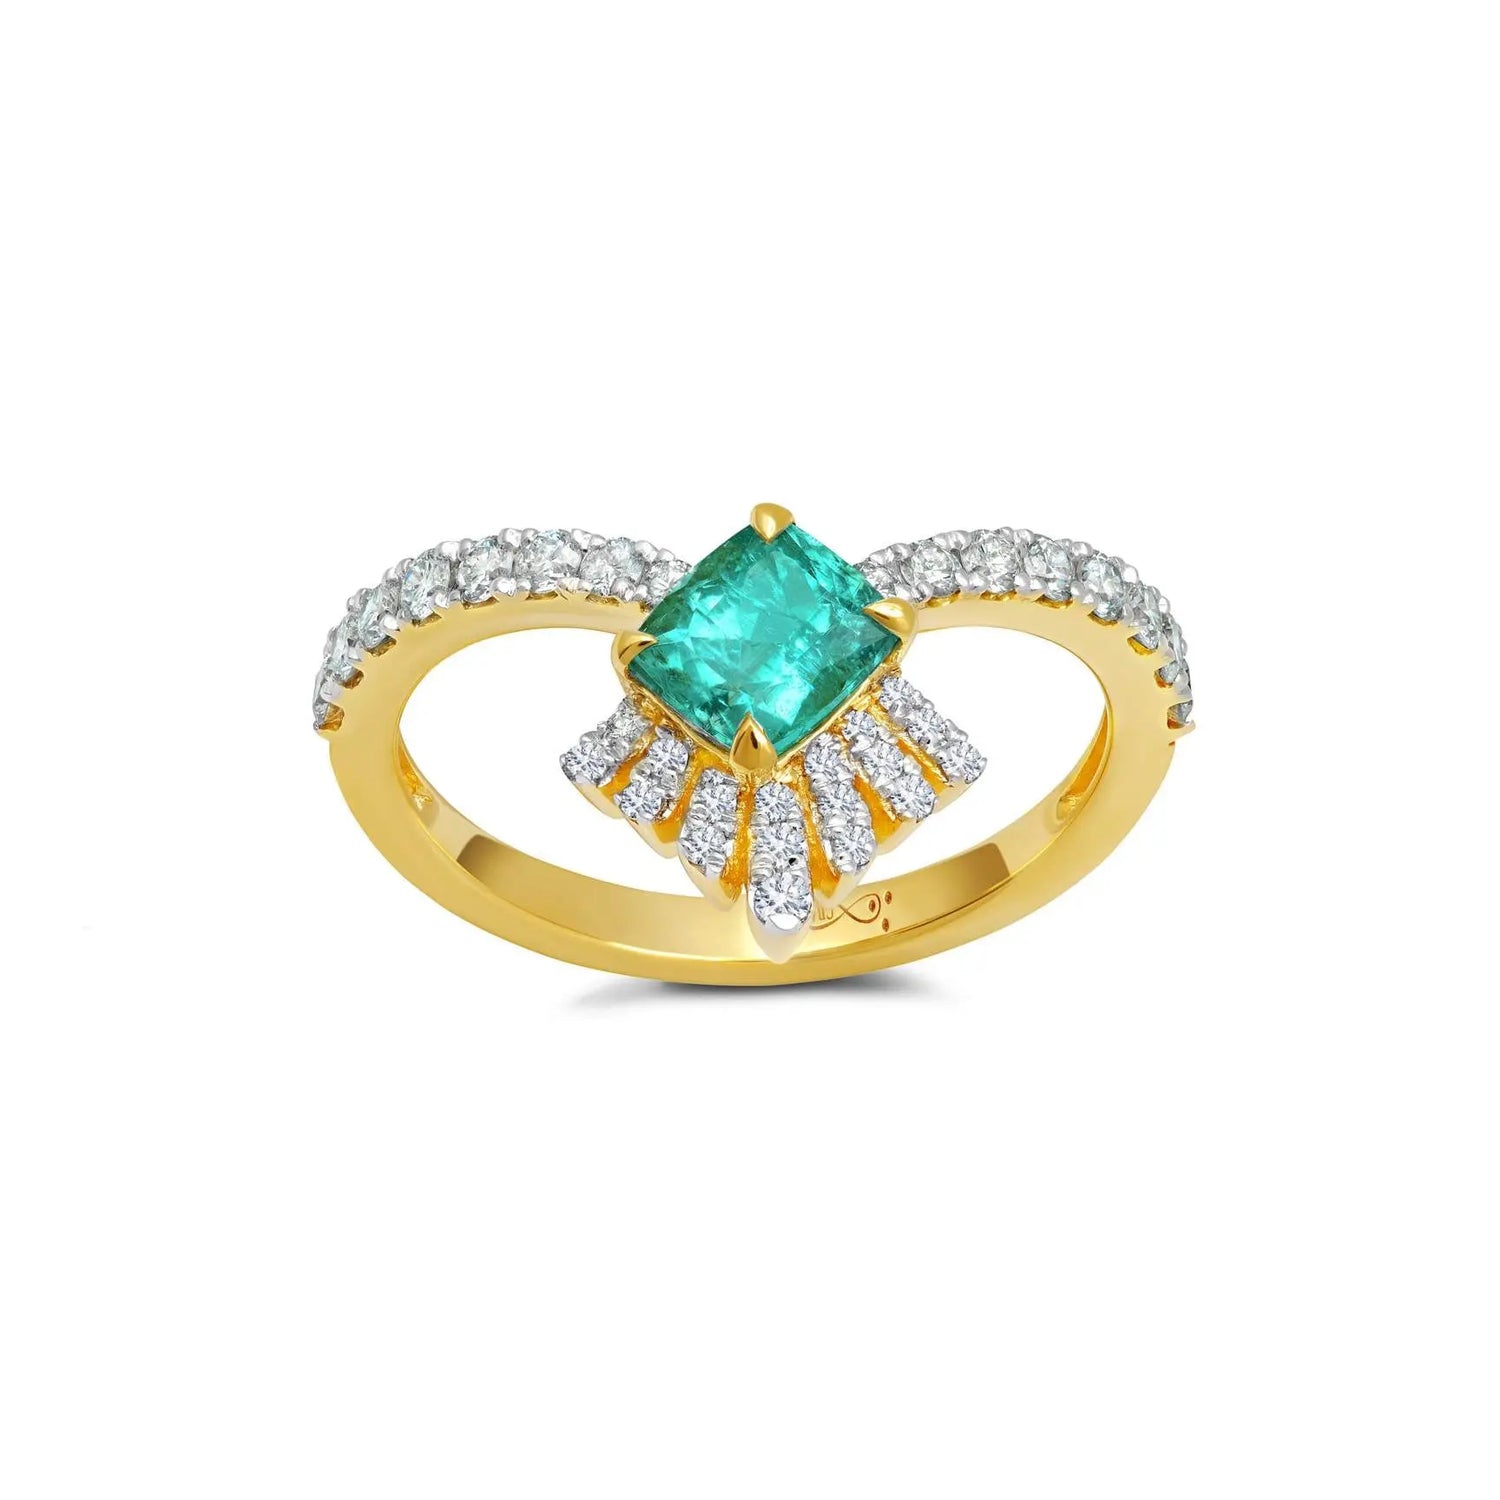 18k yellow gold  .88 Carat of Graziela Tourmaline, .46 Carat of G-H Color White Diamonds  Ring Size 7  If you need a different size, please email shop@sbvail.com  Designed by Graziela Gems